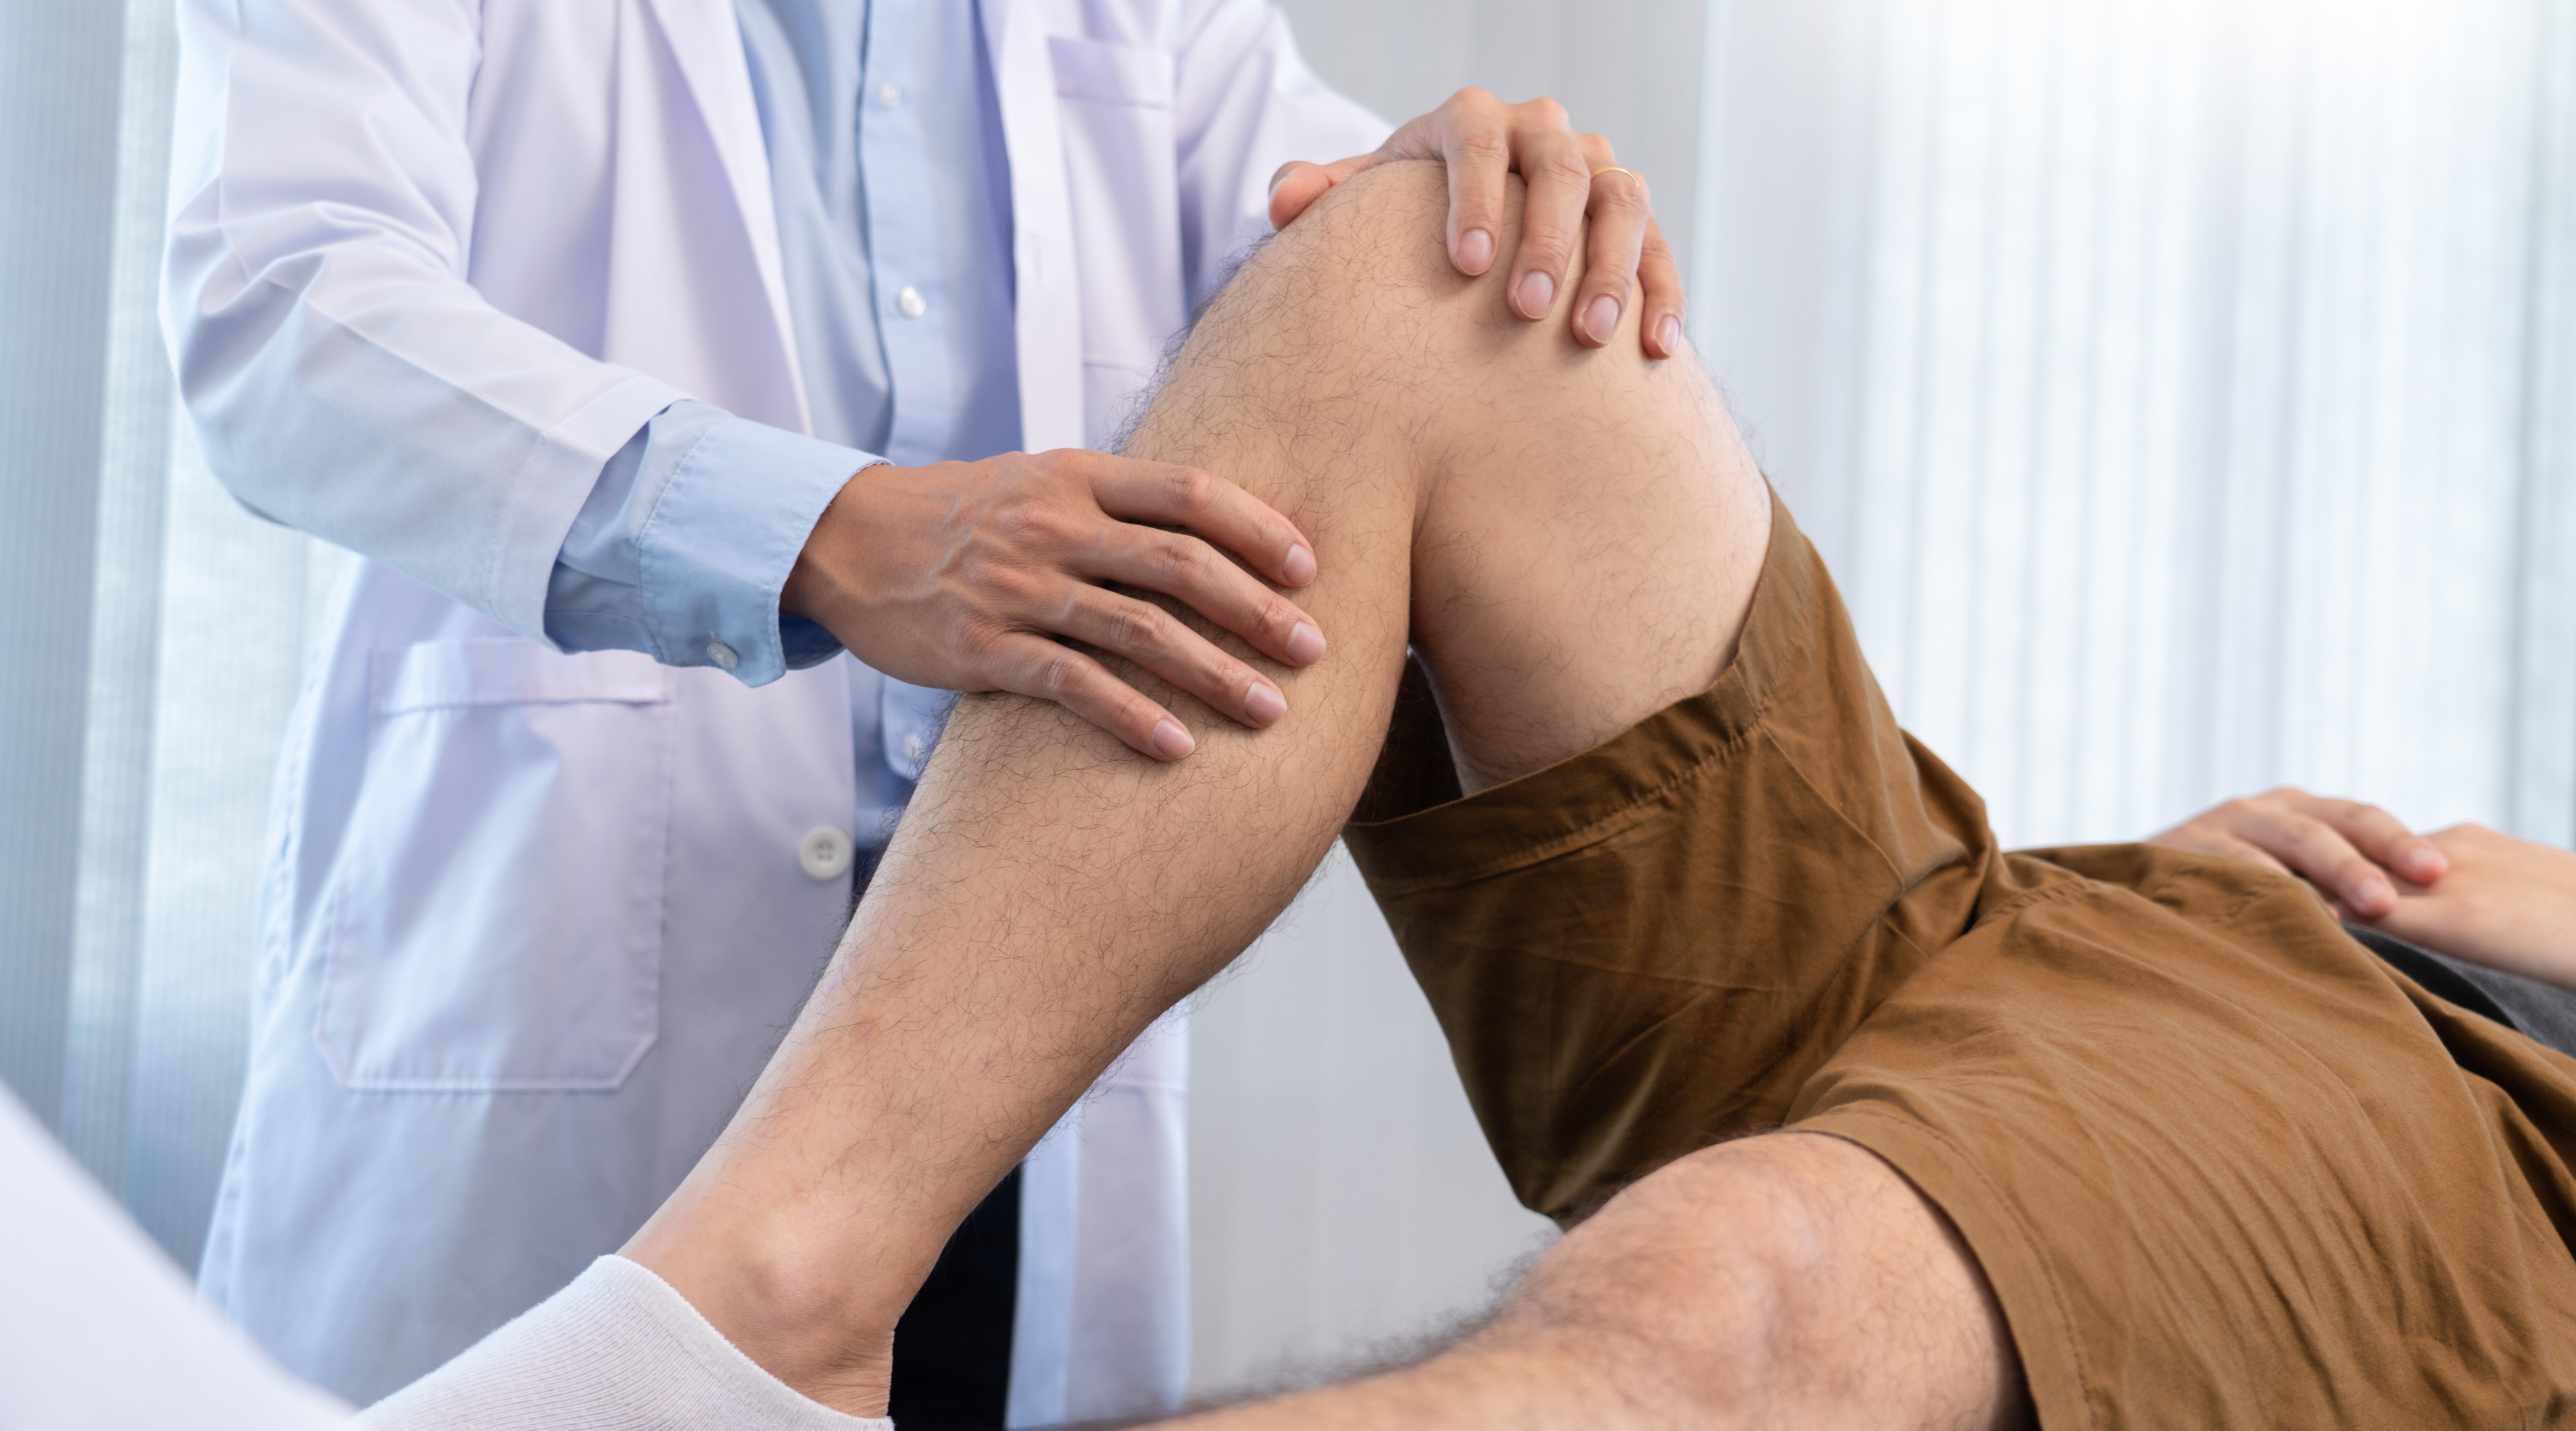 Does Medicare Cover Knee Replacement